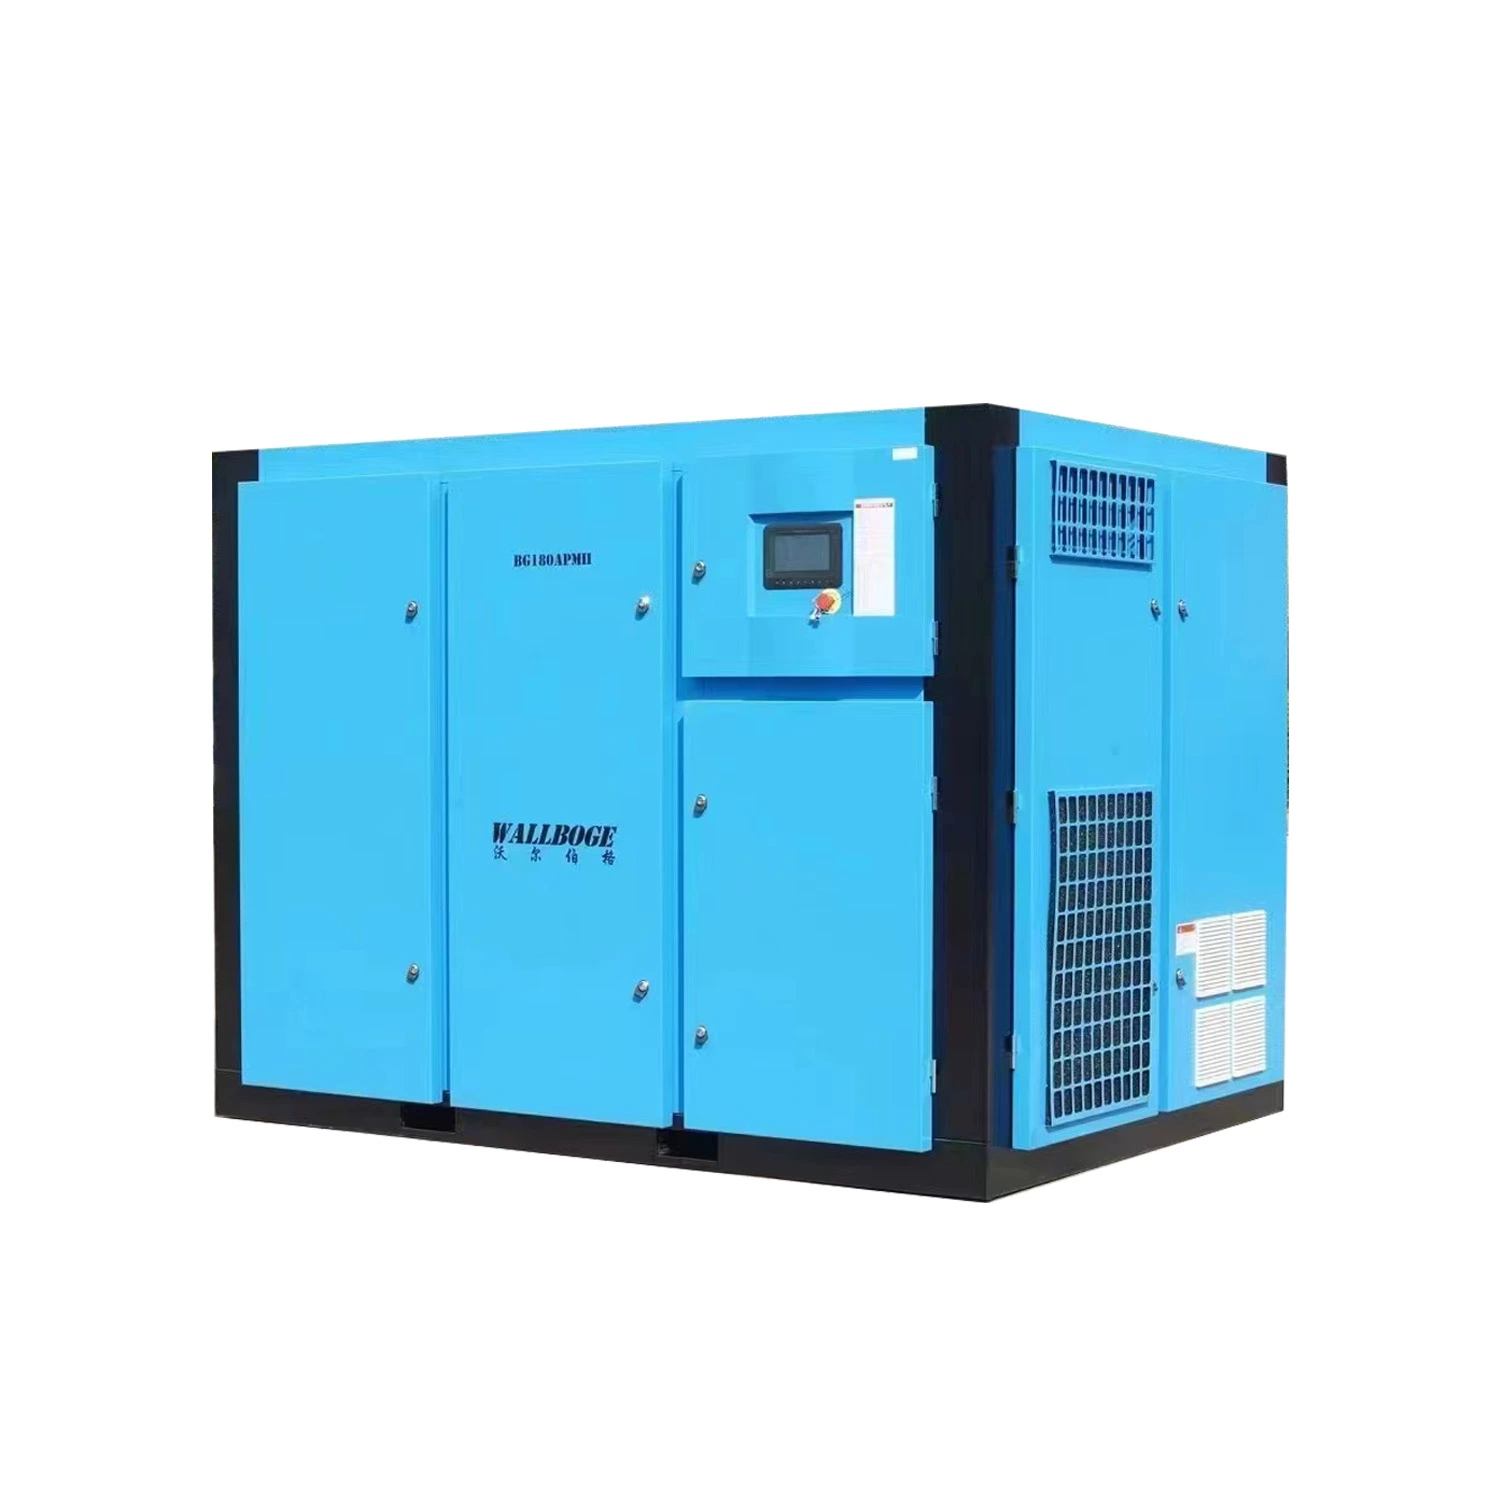 China Manufactory Heavy Duty Low Pressure Two-Stage Permanent Magnet Variable Frequency Screw Type Air Compressor, 132kw, 160kw, 185kw, 220kw, 250kw, 315kw